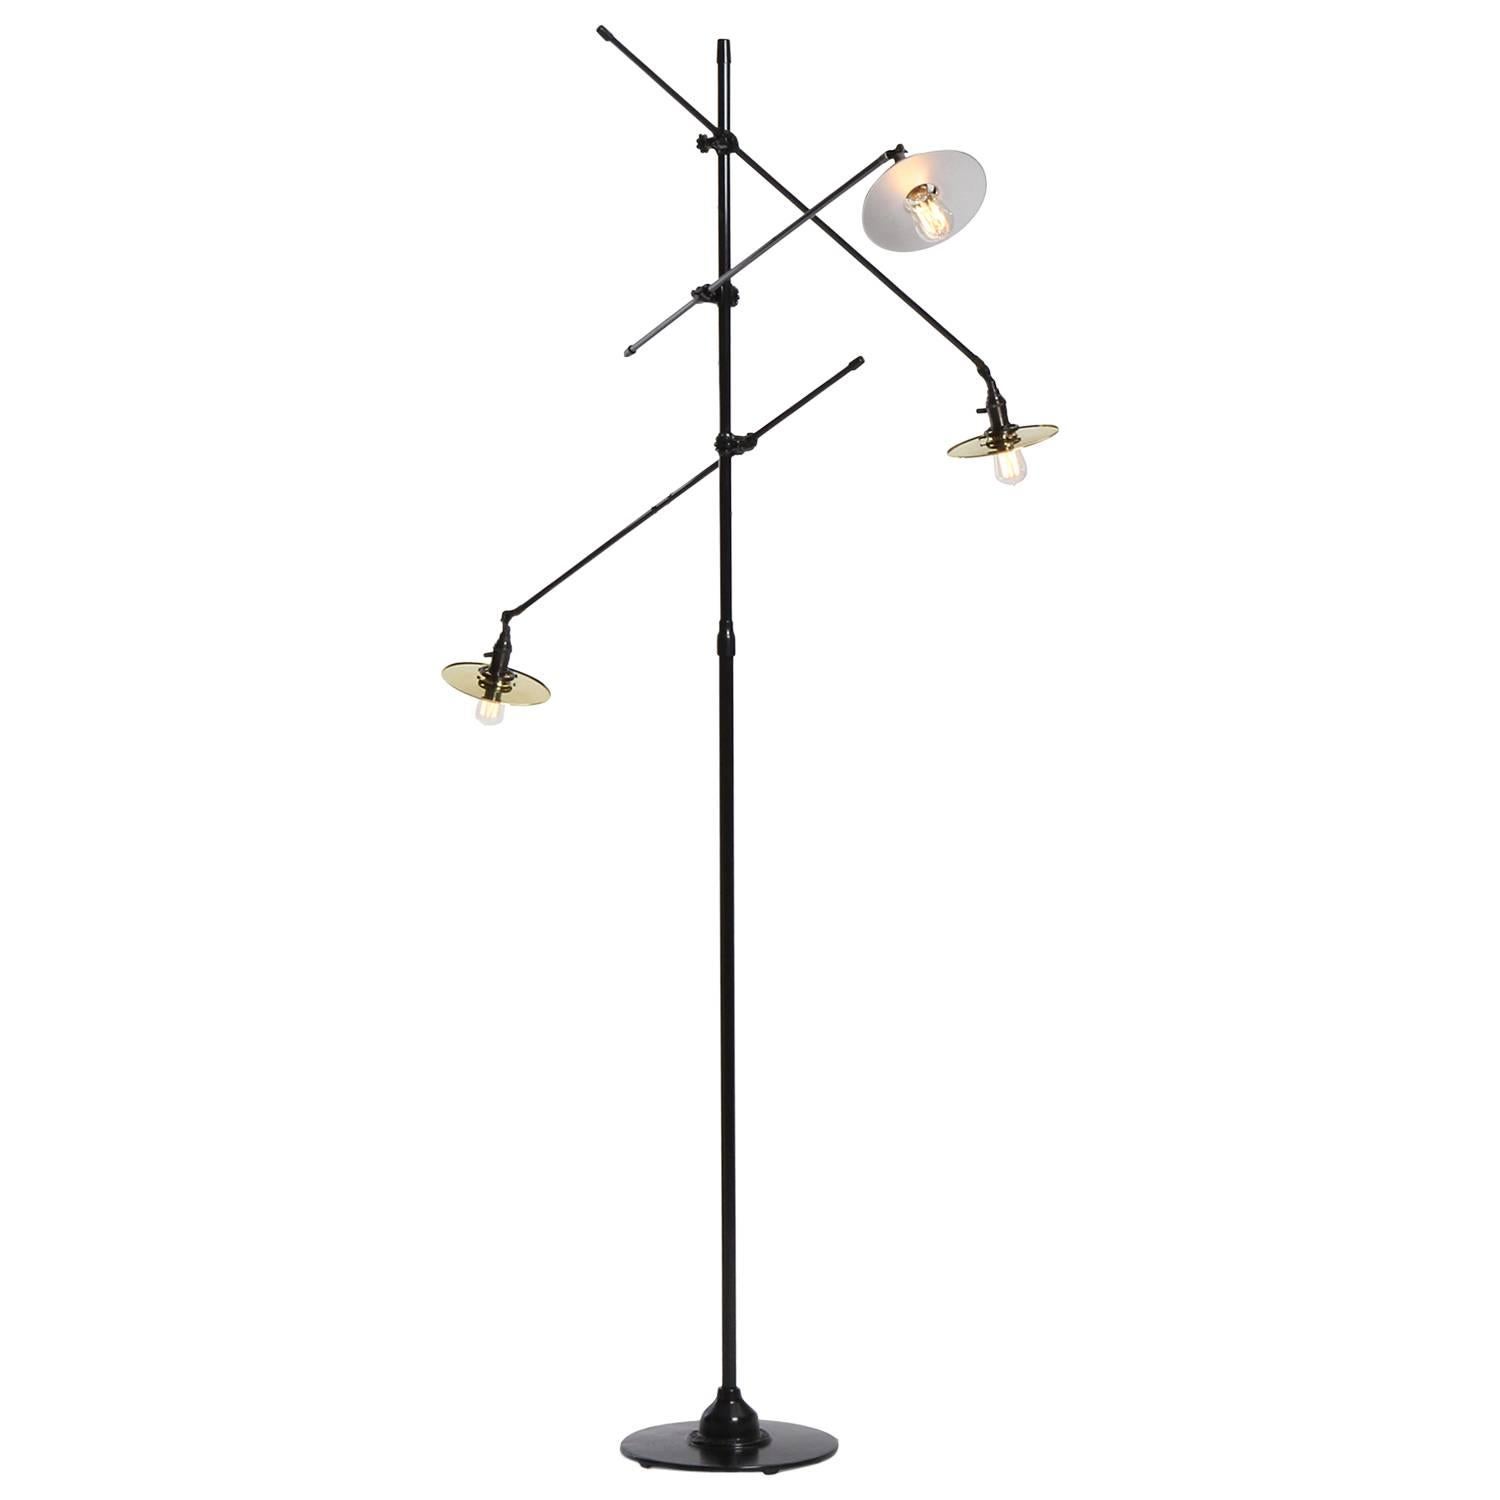 A 3-arm Industrial style floor lamp manufactured by O.C. White featuring impressively scaled and finely fabricated parts in patinated steel and polished brass. Lamp features three articulating arms that also can be adjusted vertically, rising from a